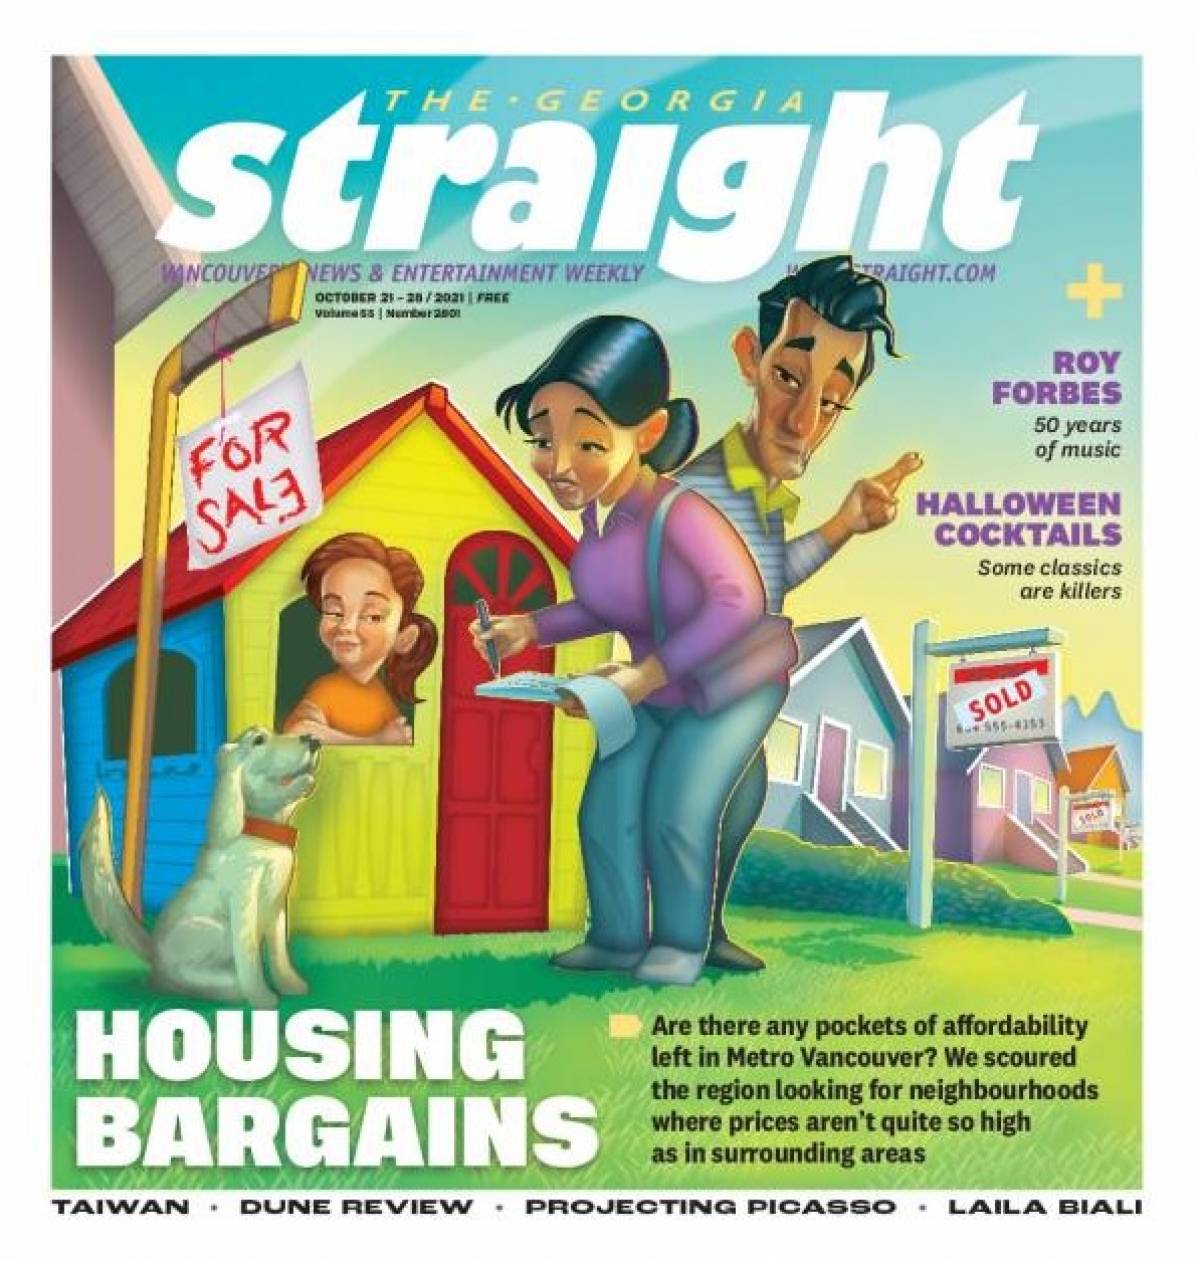 This week's cover of the <em>Georgia Straight</em> was illustrated by Shayne Letain and designed by Miguel Hernandez.